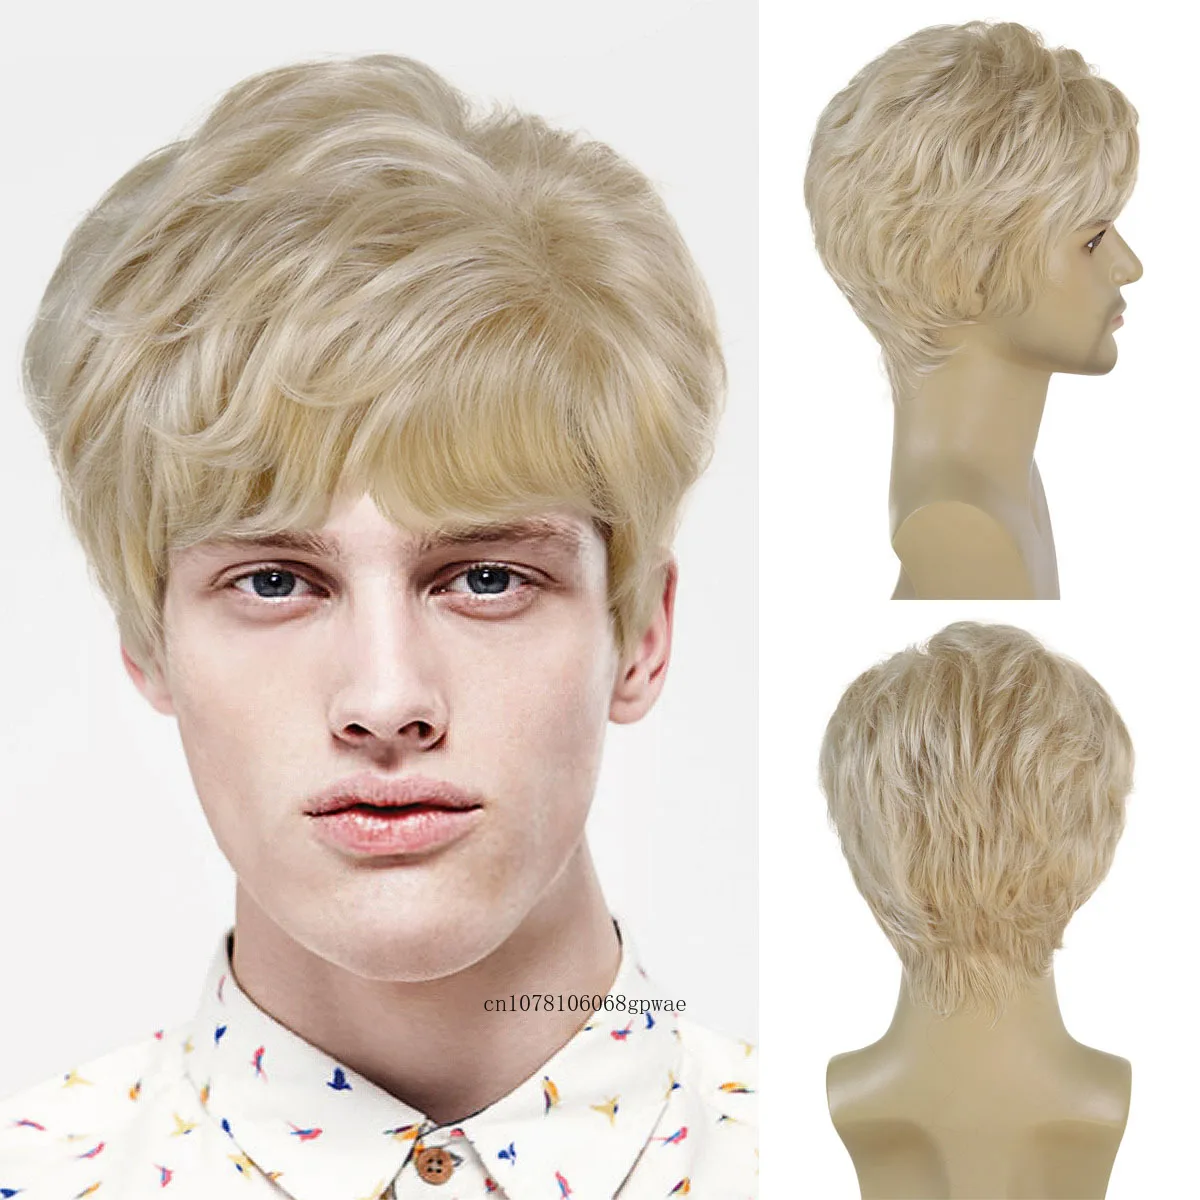 

Synthetic Curly Wig with Bangs Fashion Blonde Wigs for Men Daily Cosplay Halloween Party Short Male Wig Natural Layered Haircut